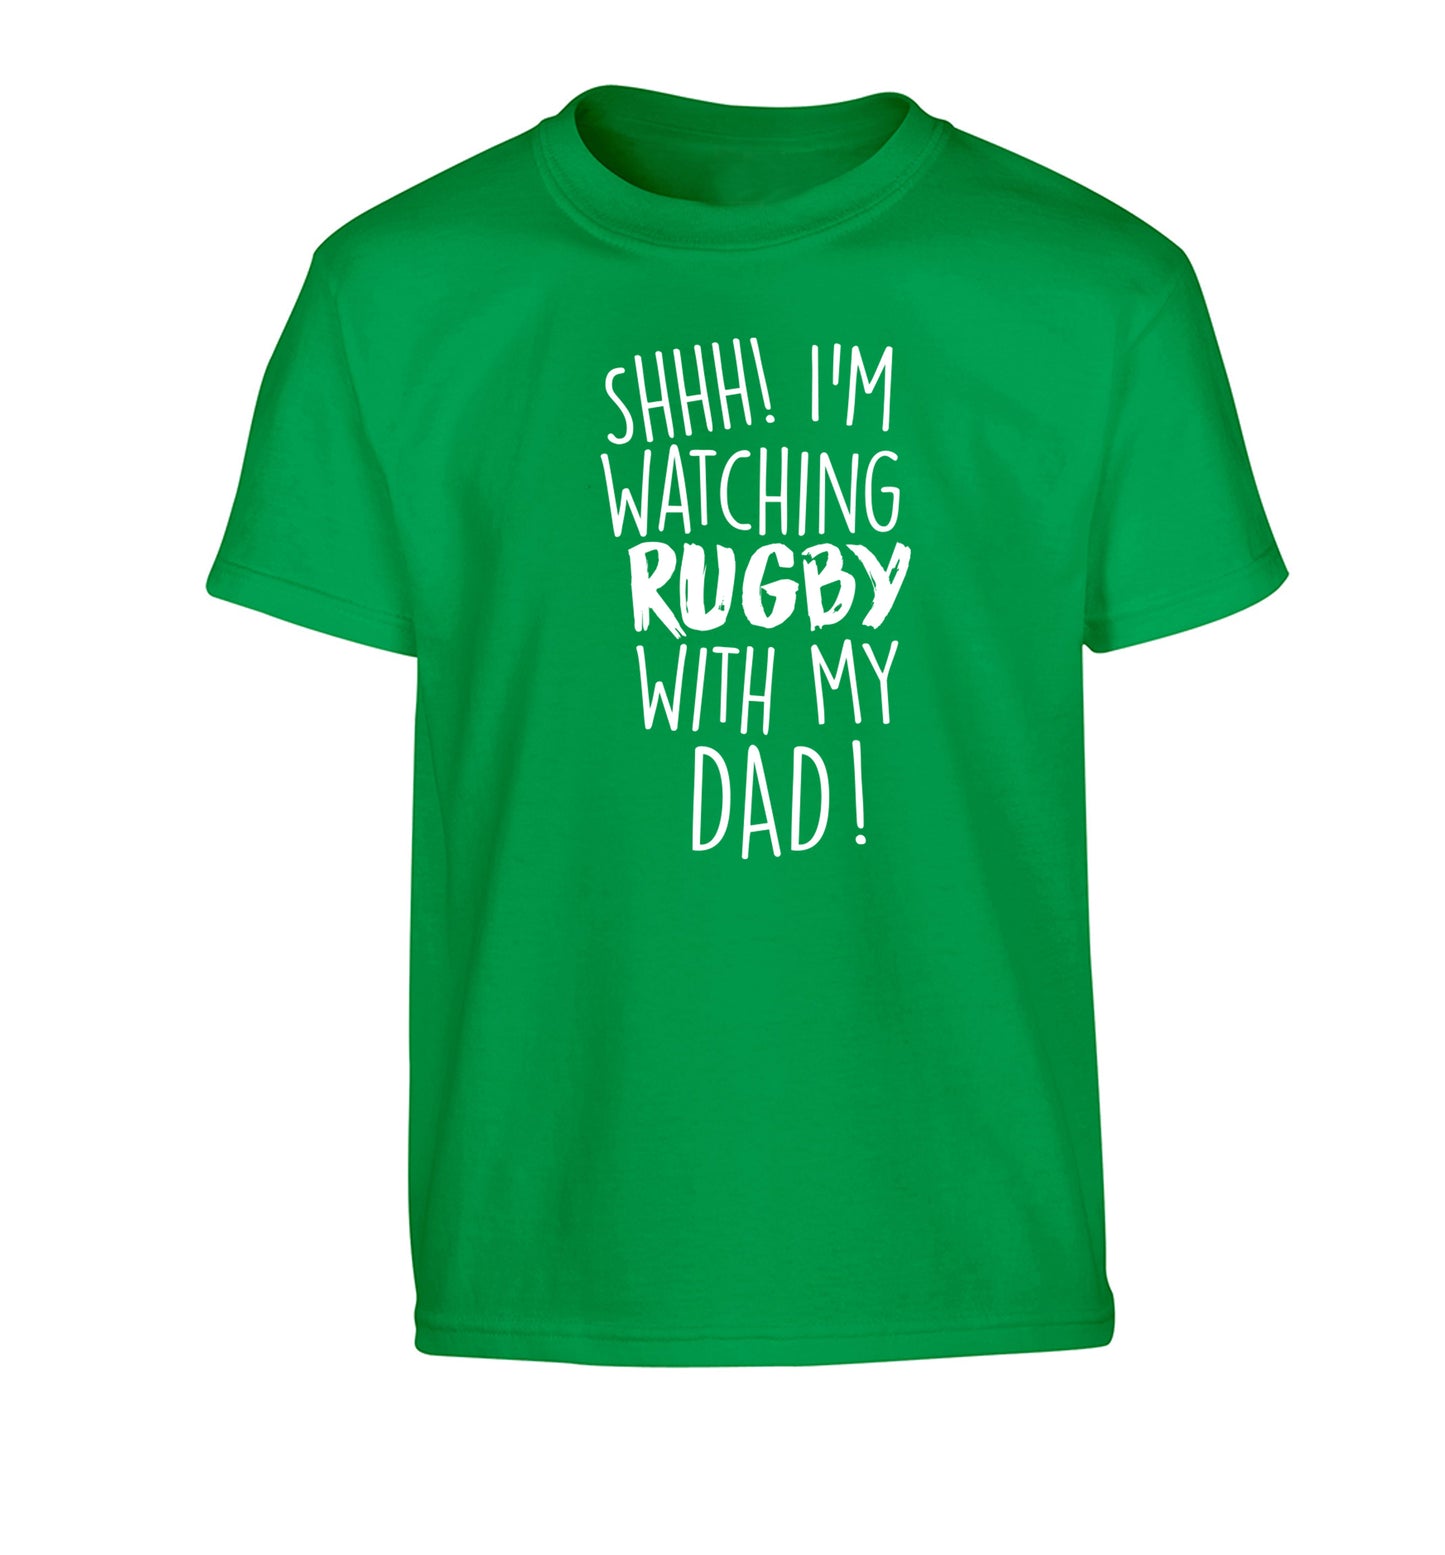 Shh... I'm watching rugby with my dad Children's green Tshirt 12-13 Years